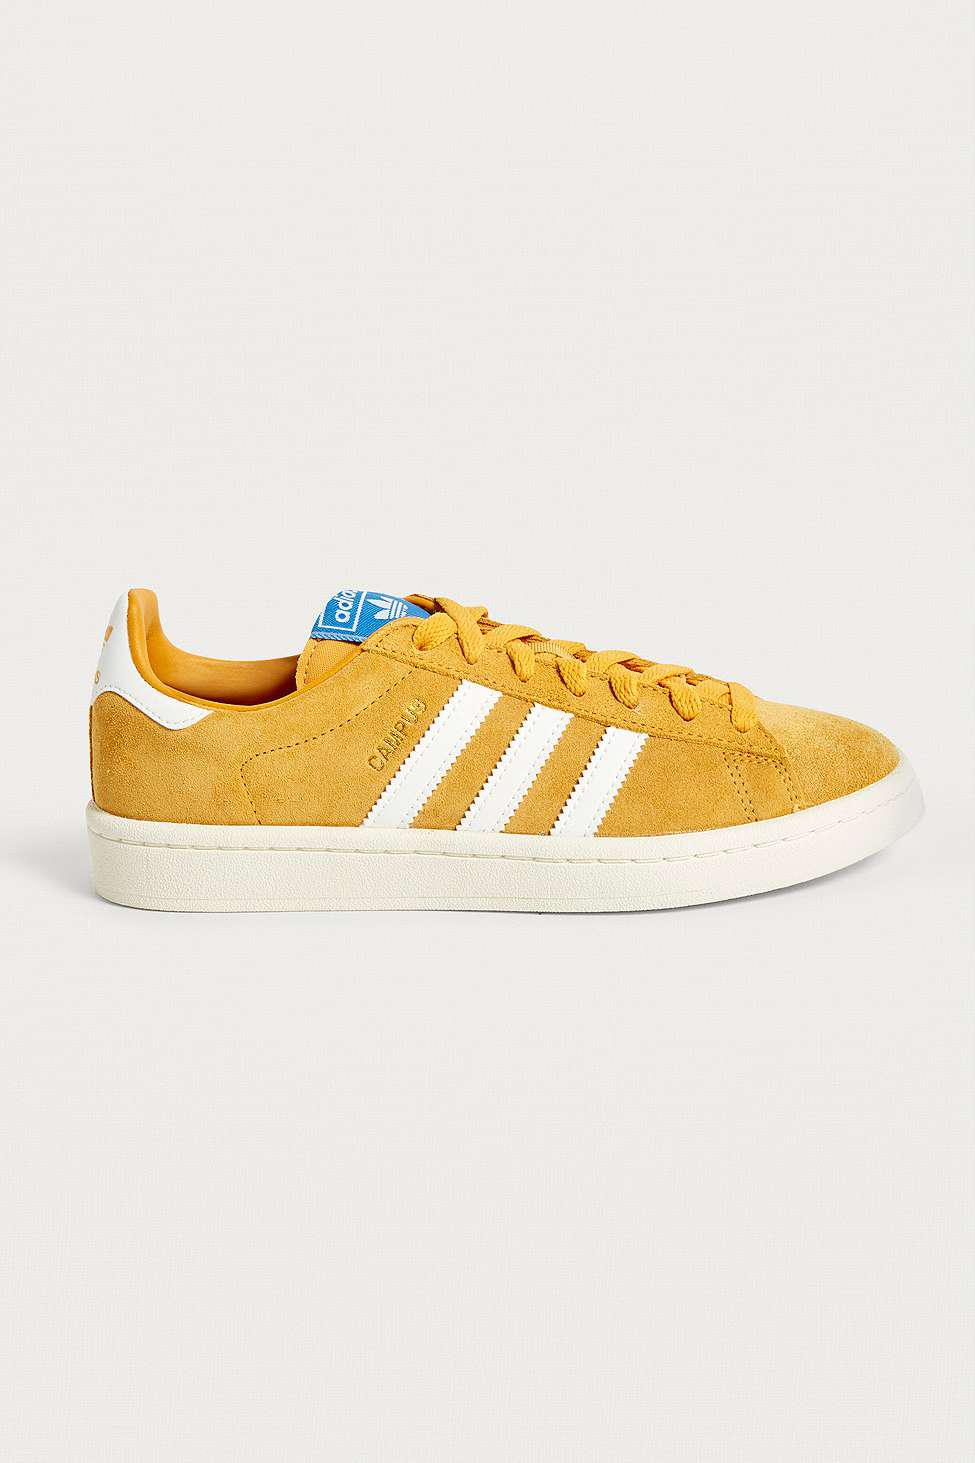 yellow suede adidas